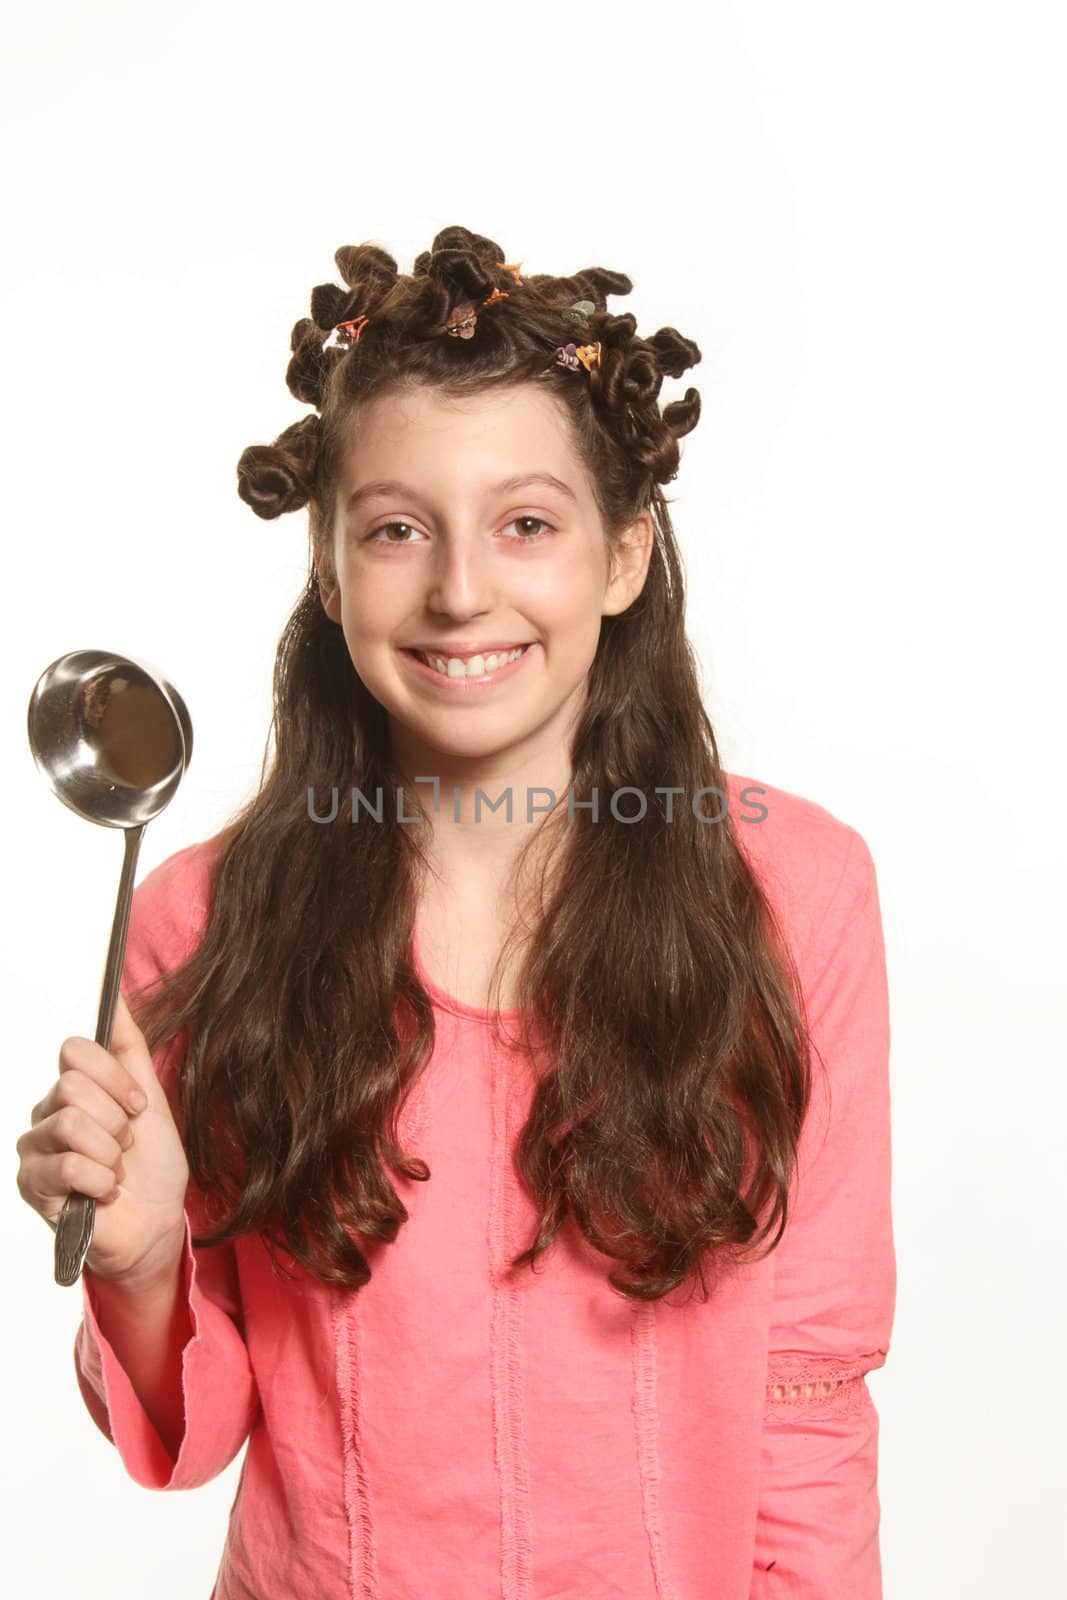 The girl holds in hands ladle and smiles